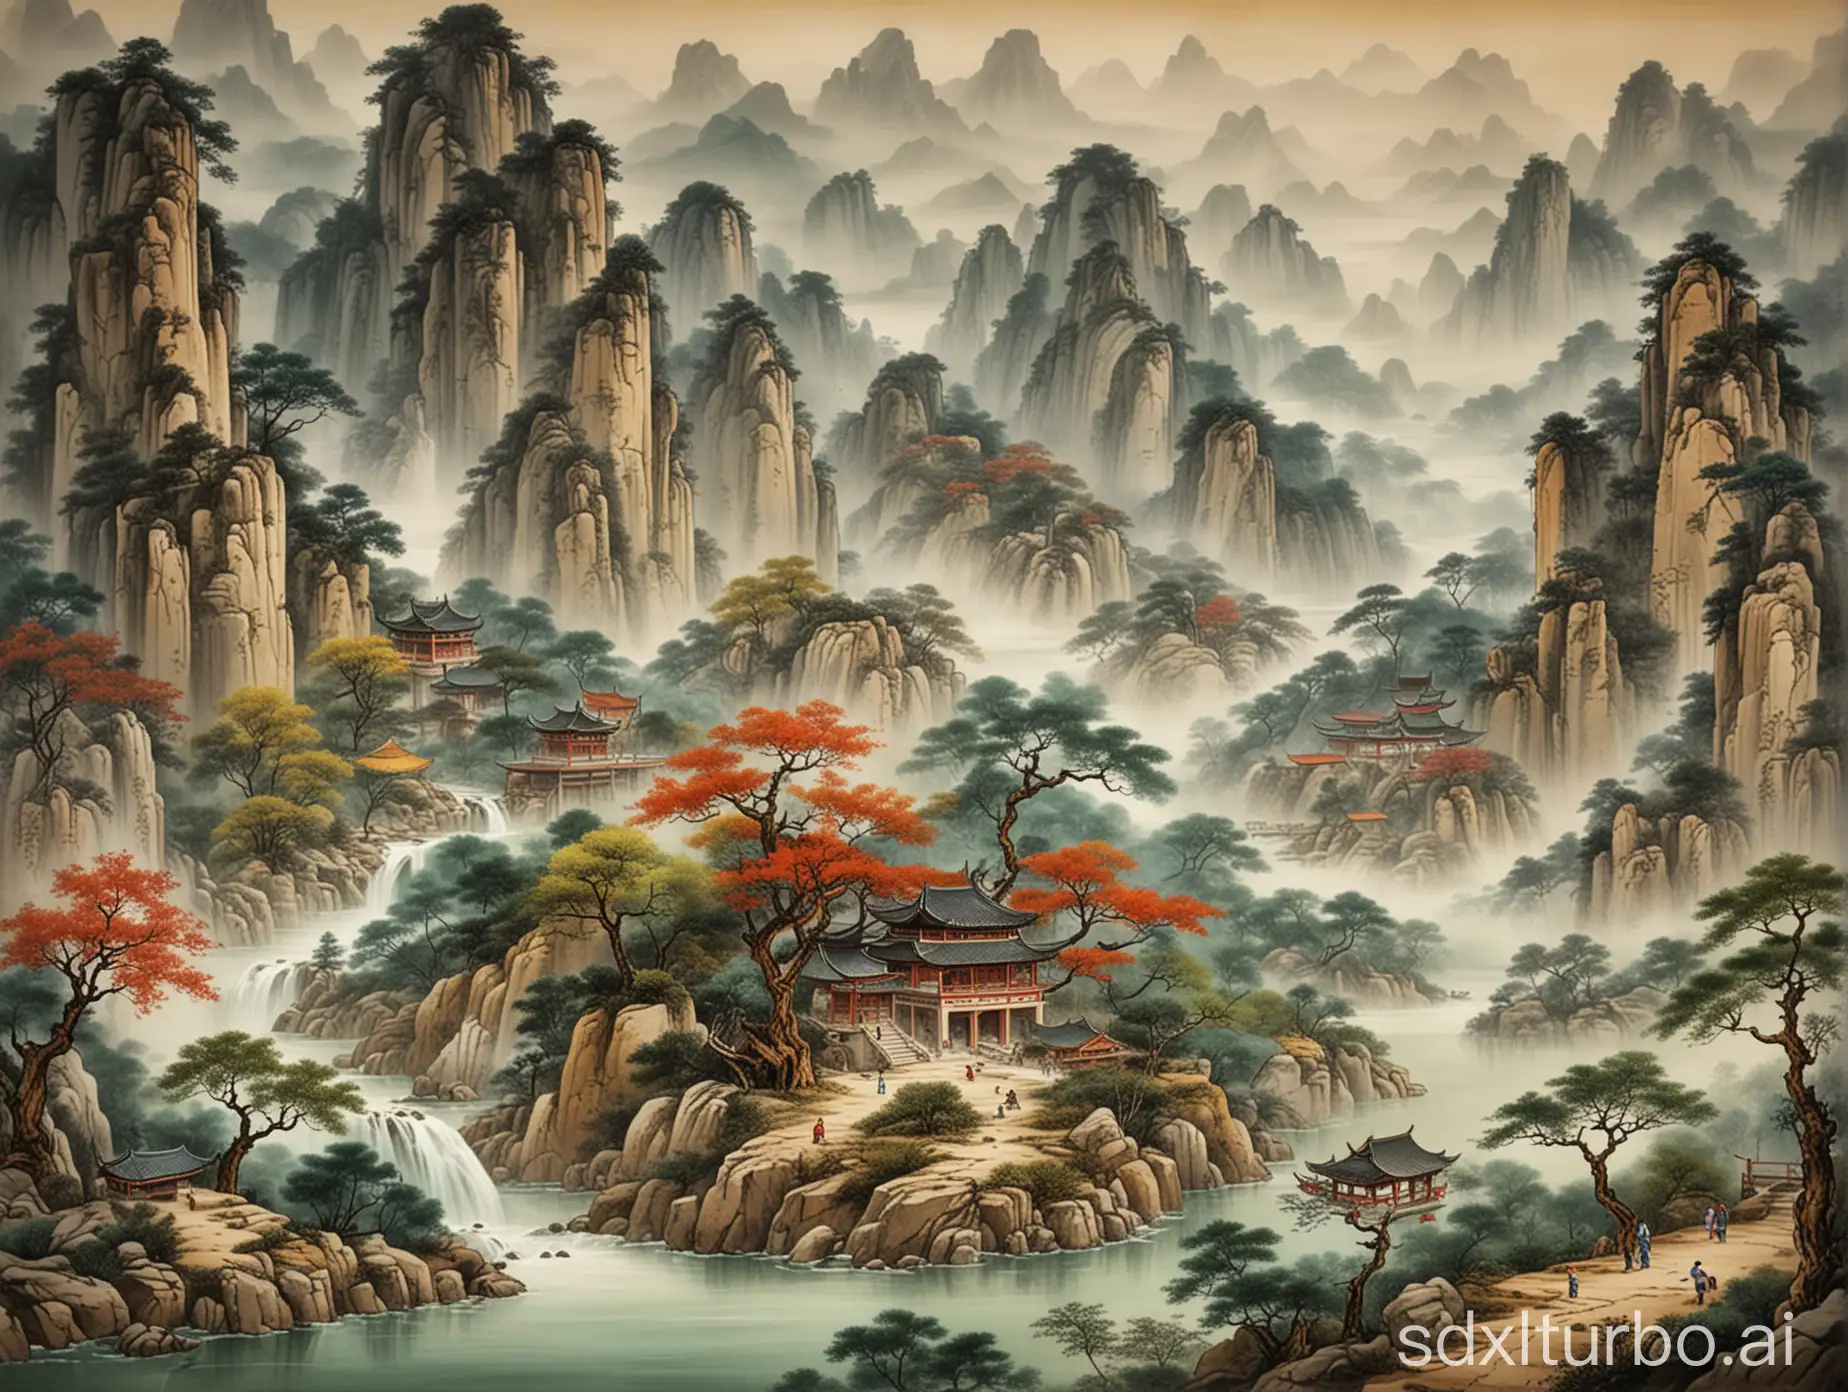 Chinese ancient style landscape painting, magnificent, there are forests and water in the mountains